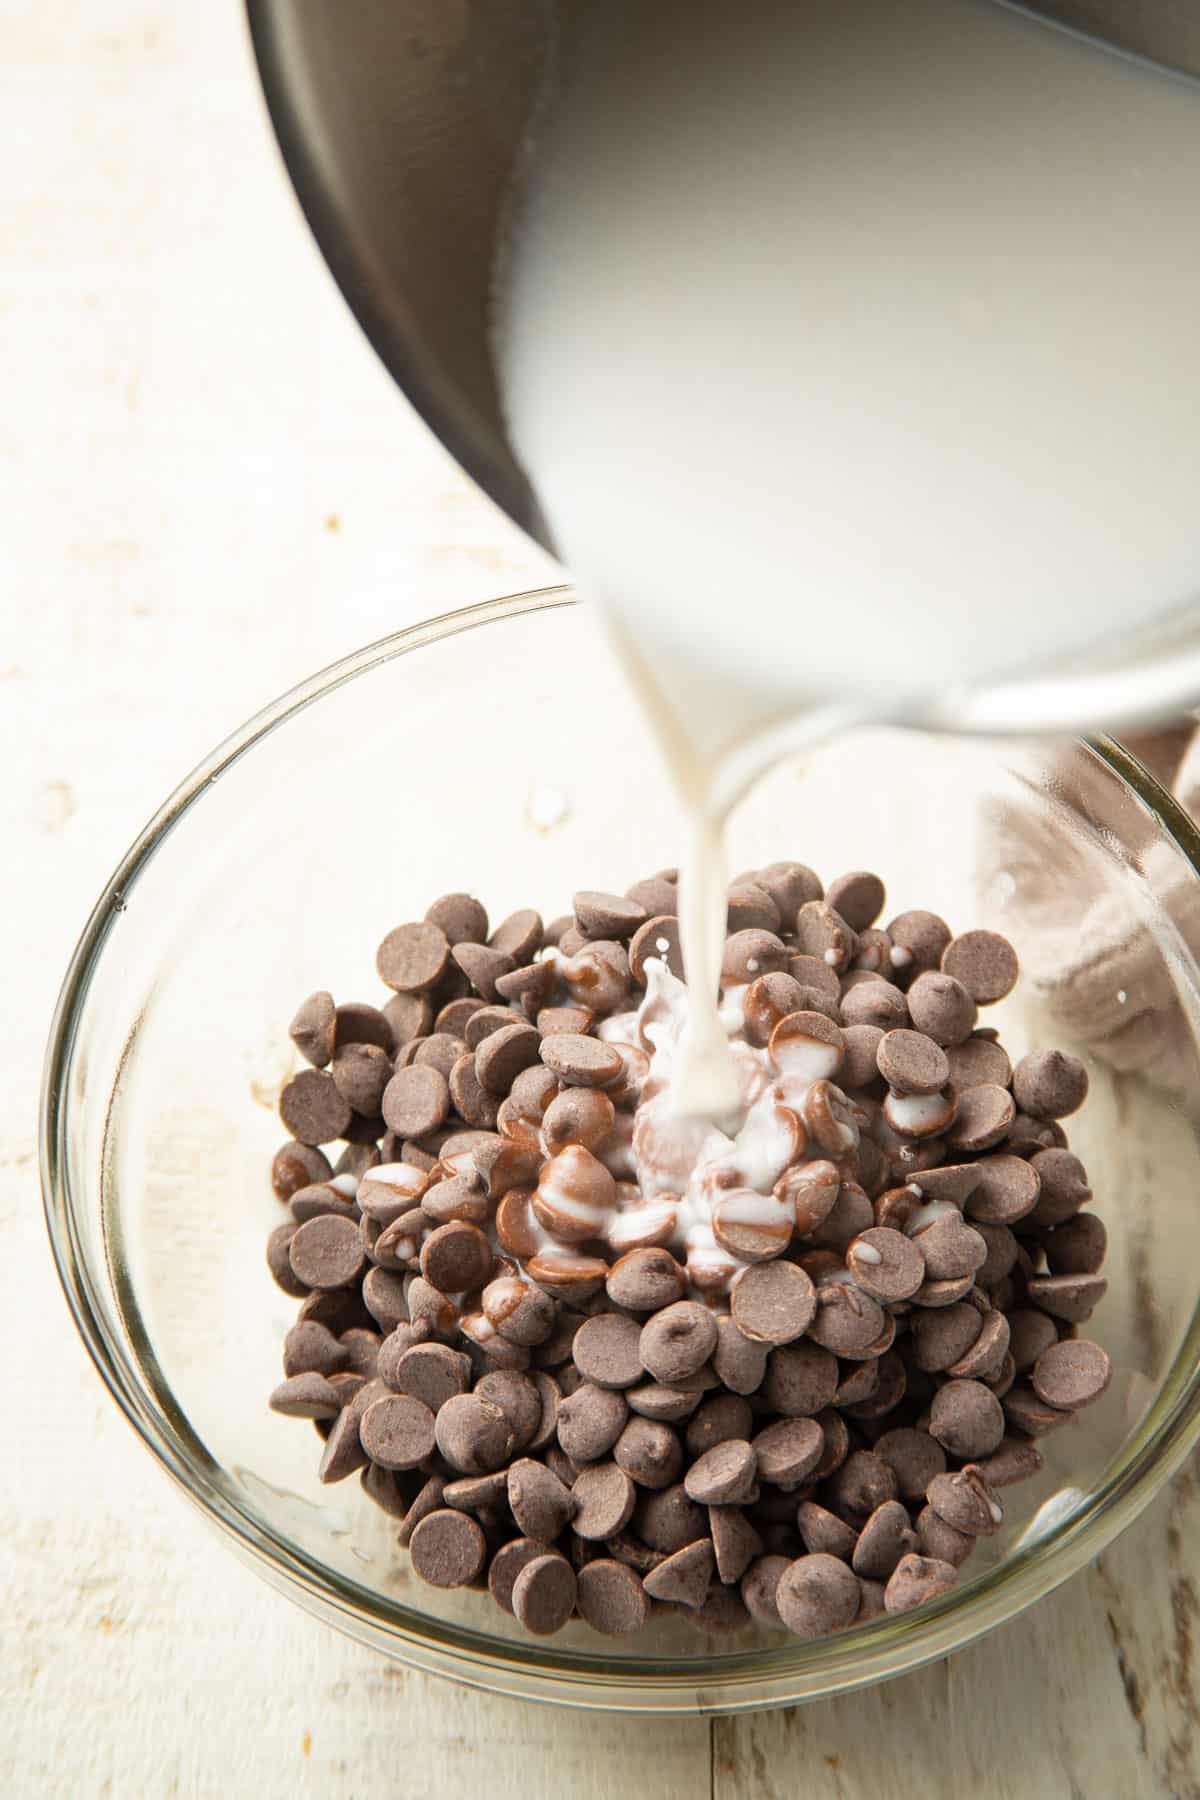 Hot coconut milk being poured over a bowl of chocolate chips.